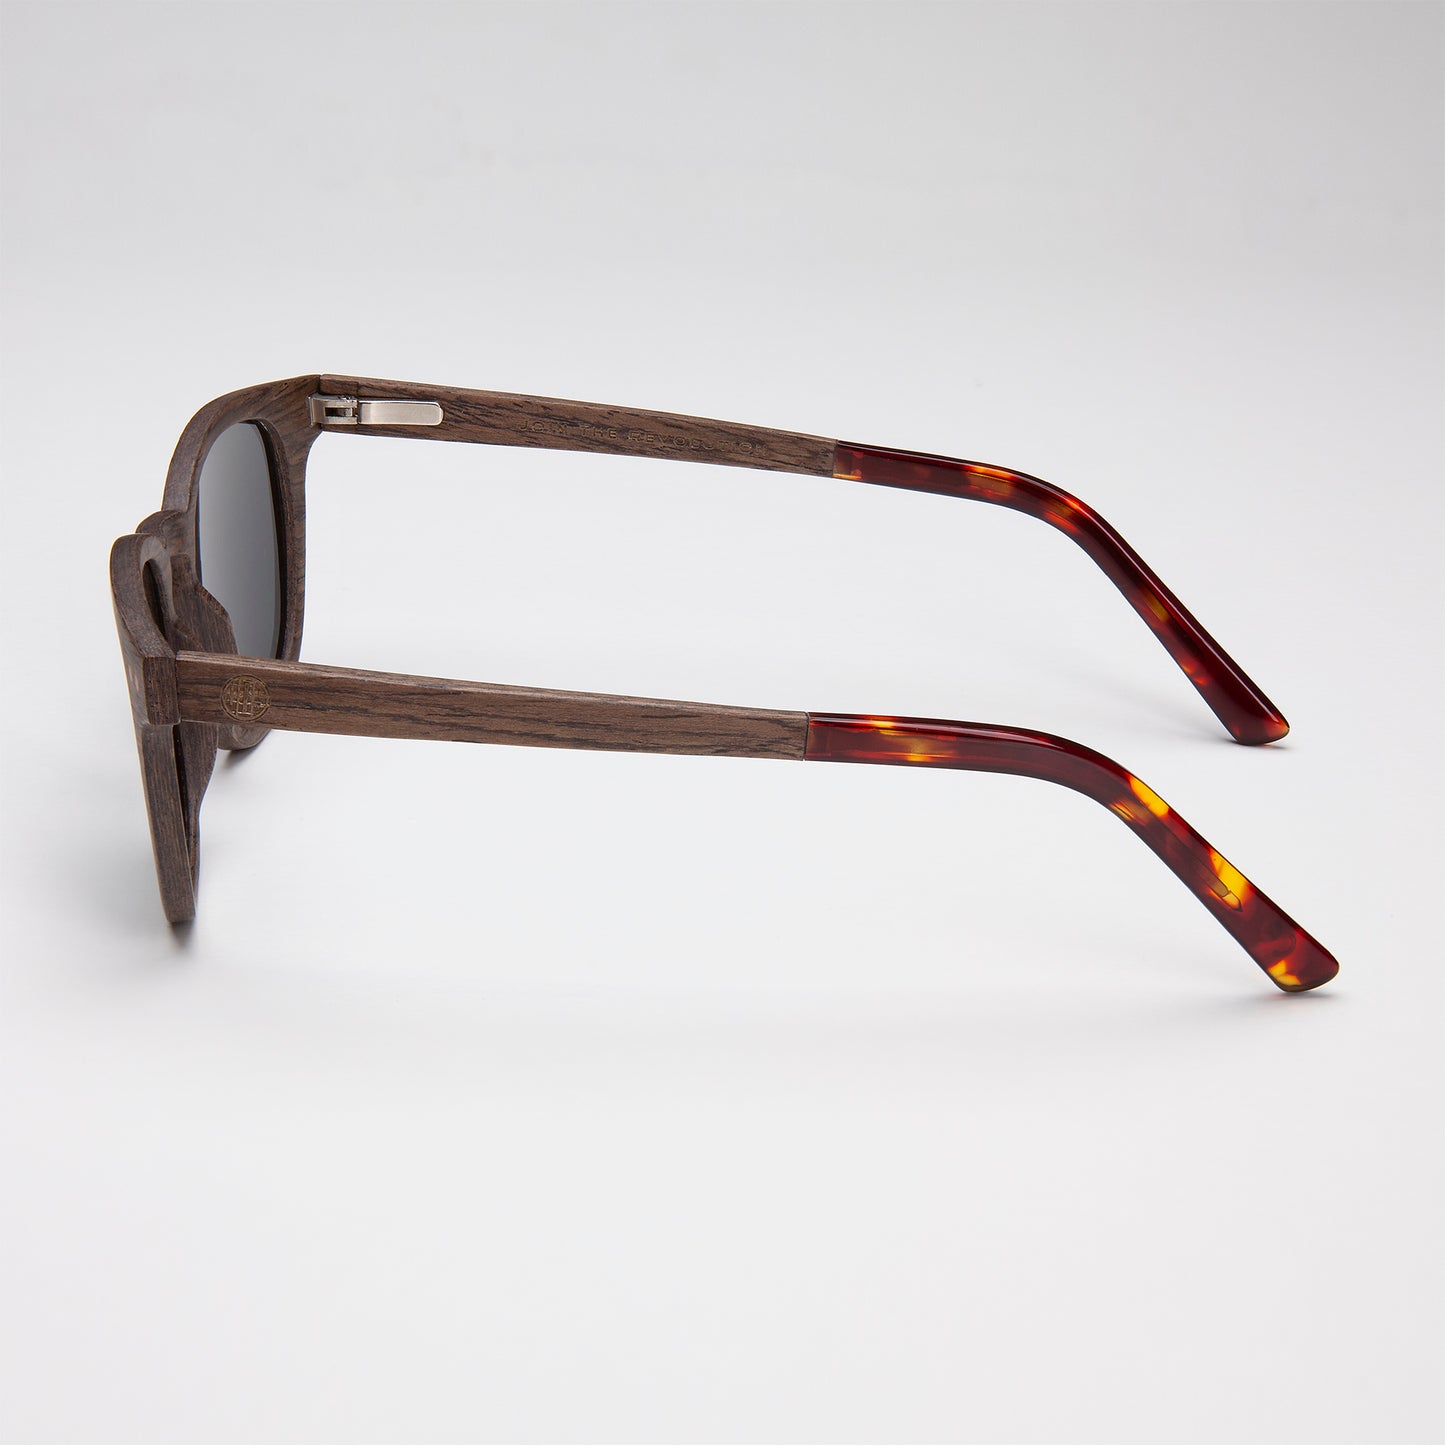 PolarisedShaka Walnut EditionThe SHAKA sunglasses are the ultimate post surf pair of shades. With stylish frames made from walnut wood off cuts, it provides a lightweight and beautiful design. O